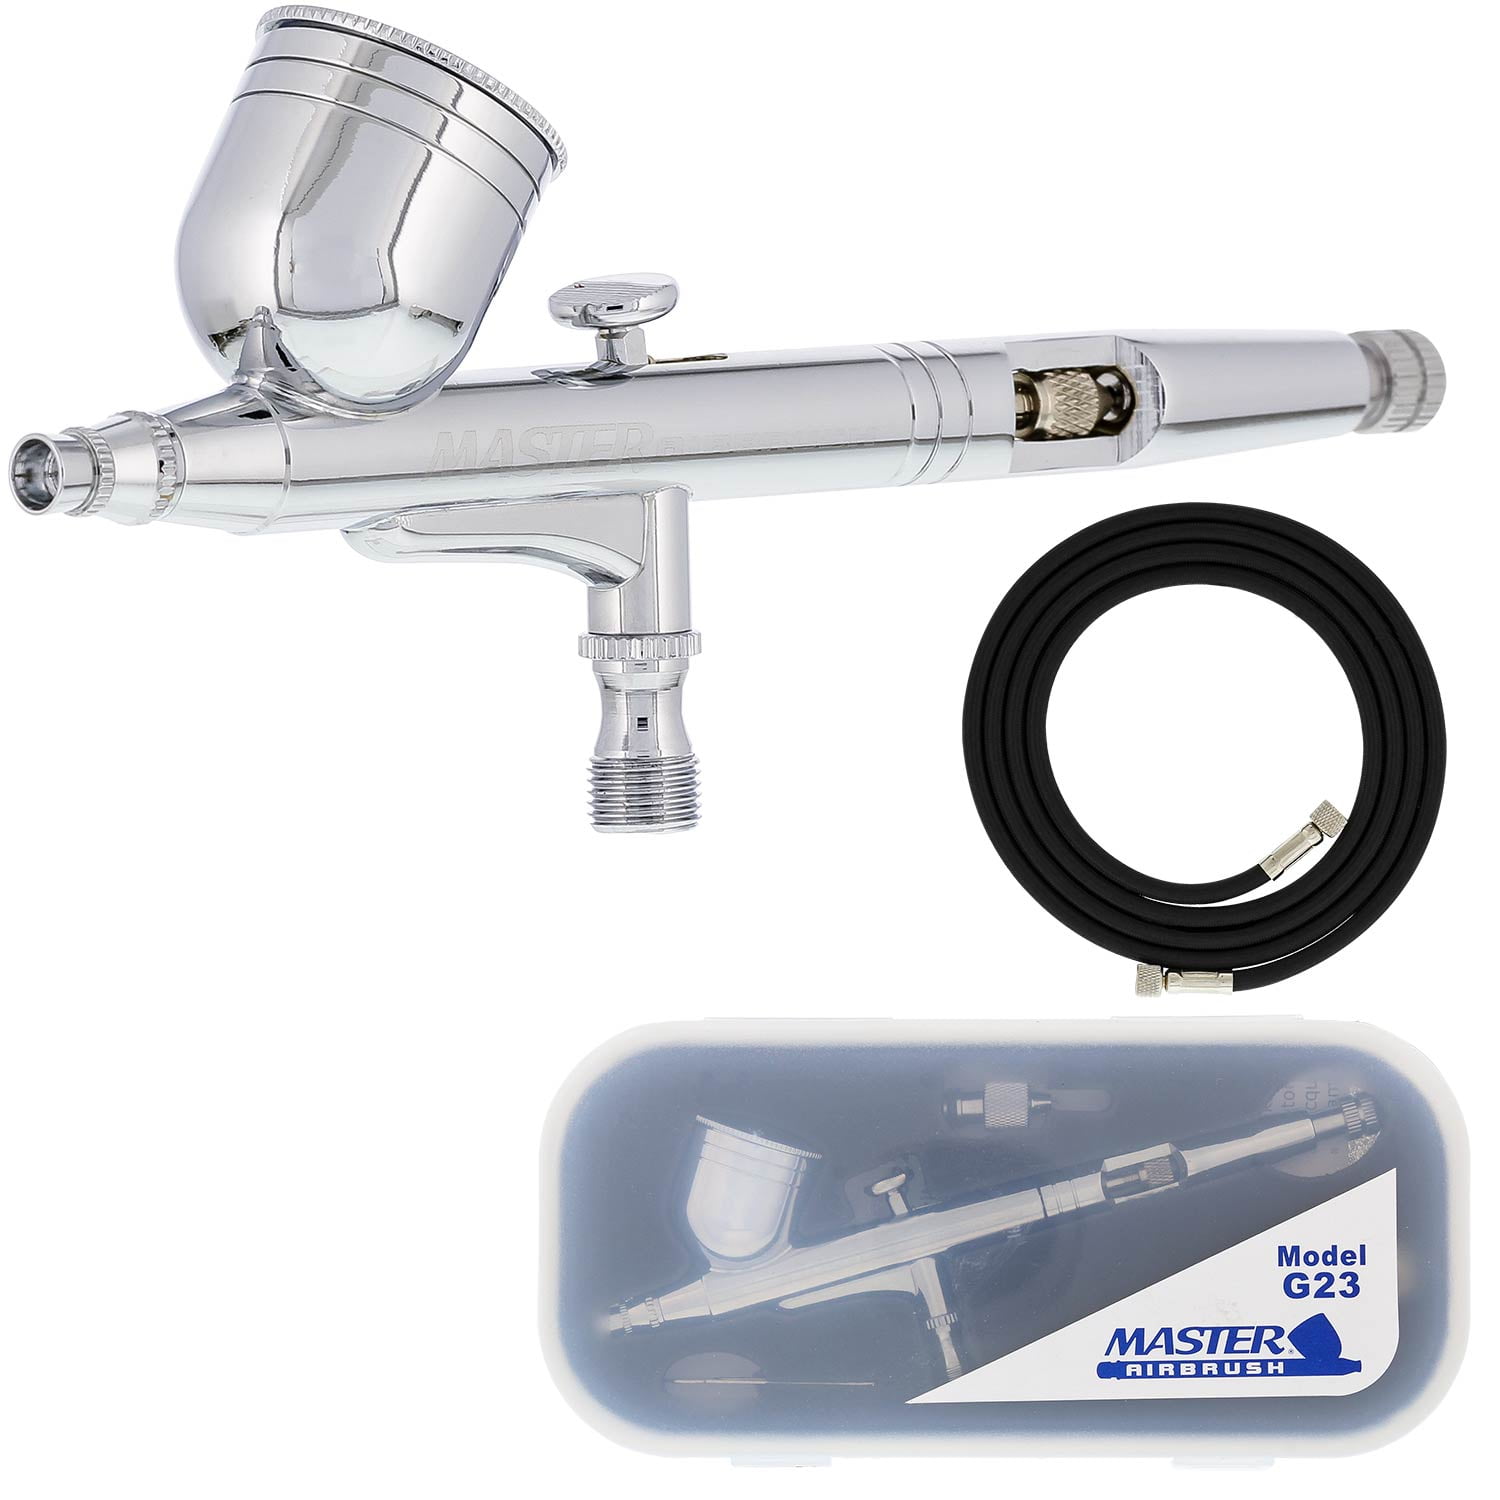 Deluxe Airbrush Cleaning Kit - Includes a 3 in 1 Airbrush Clean